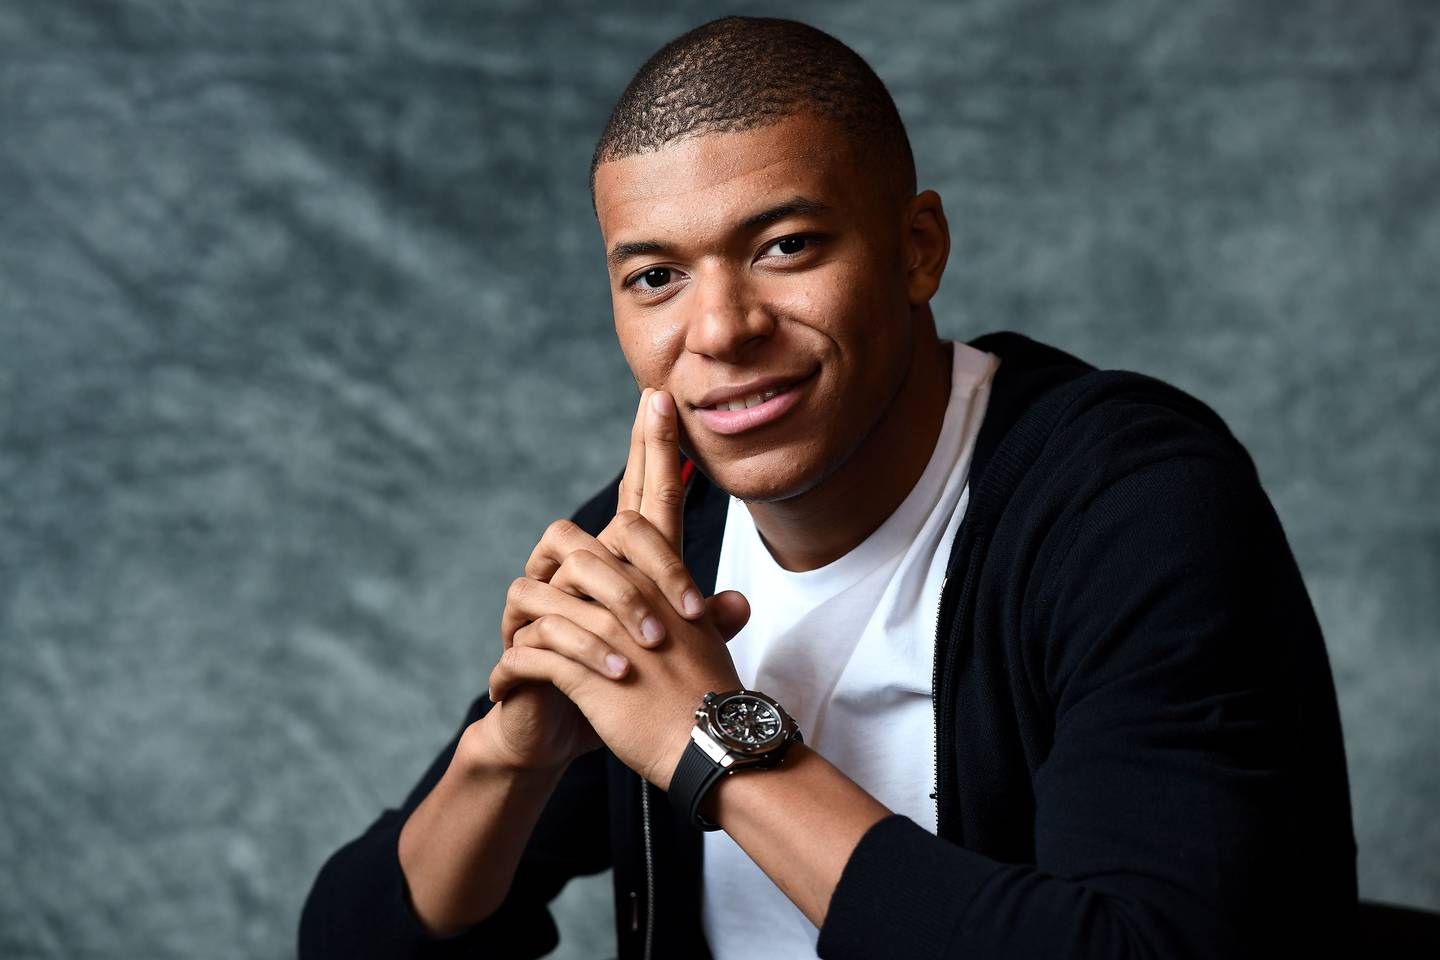 France's forward Kylian MBappe poses during a photo session after an interview with AFP in which he announced the formalization of his Ambassadorship with the Swiss luxury watchmaker Hublot.